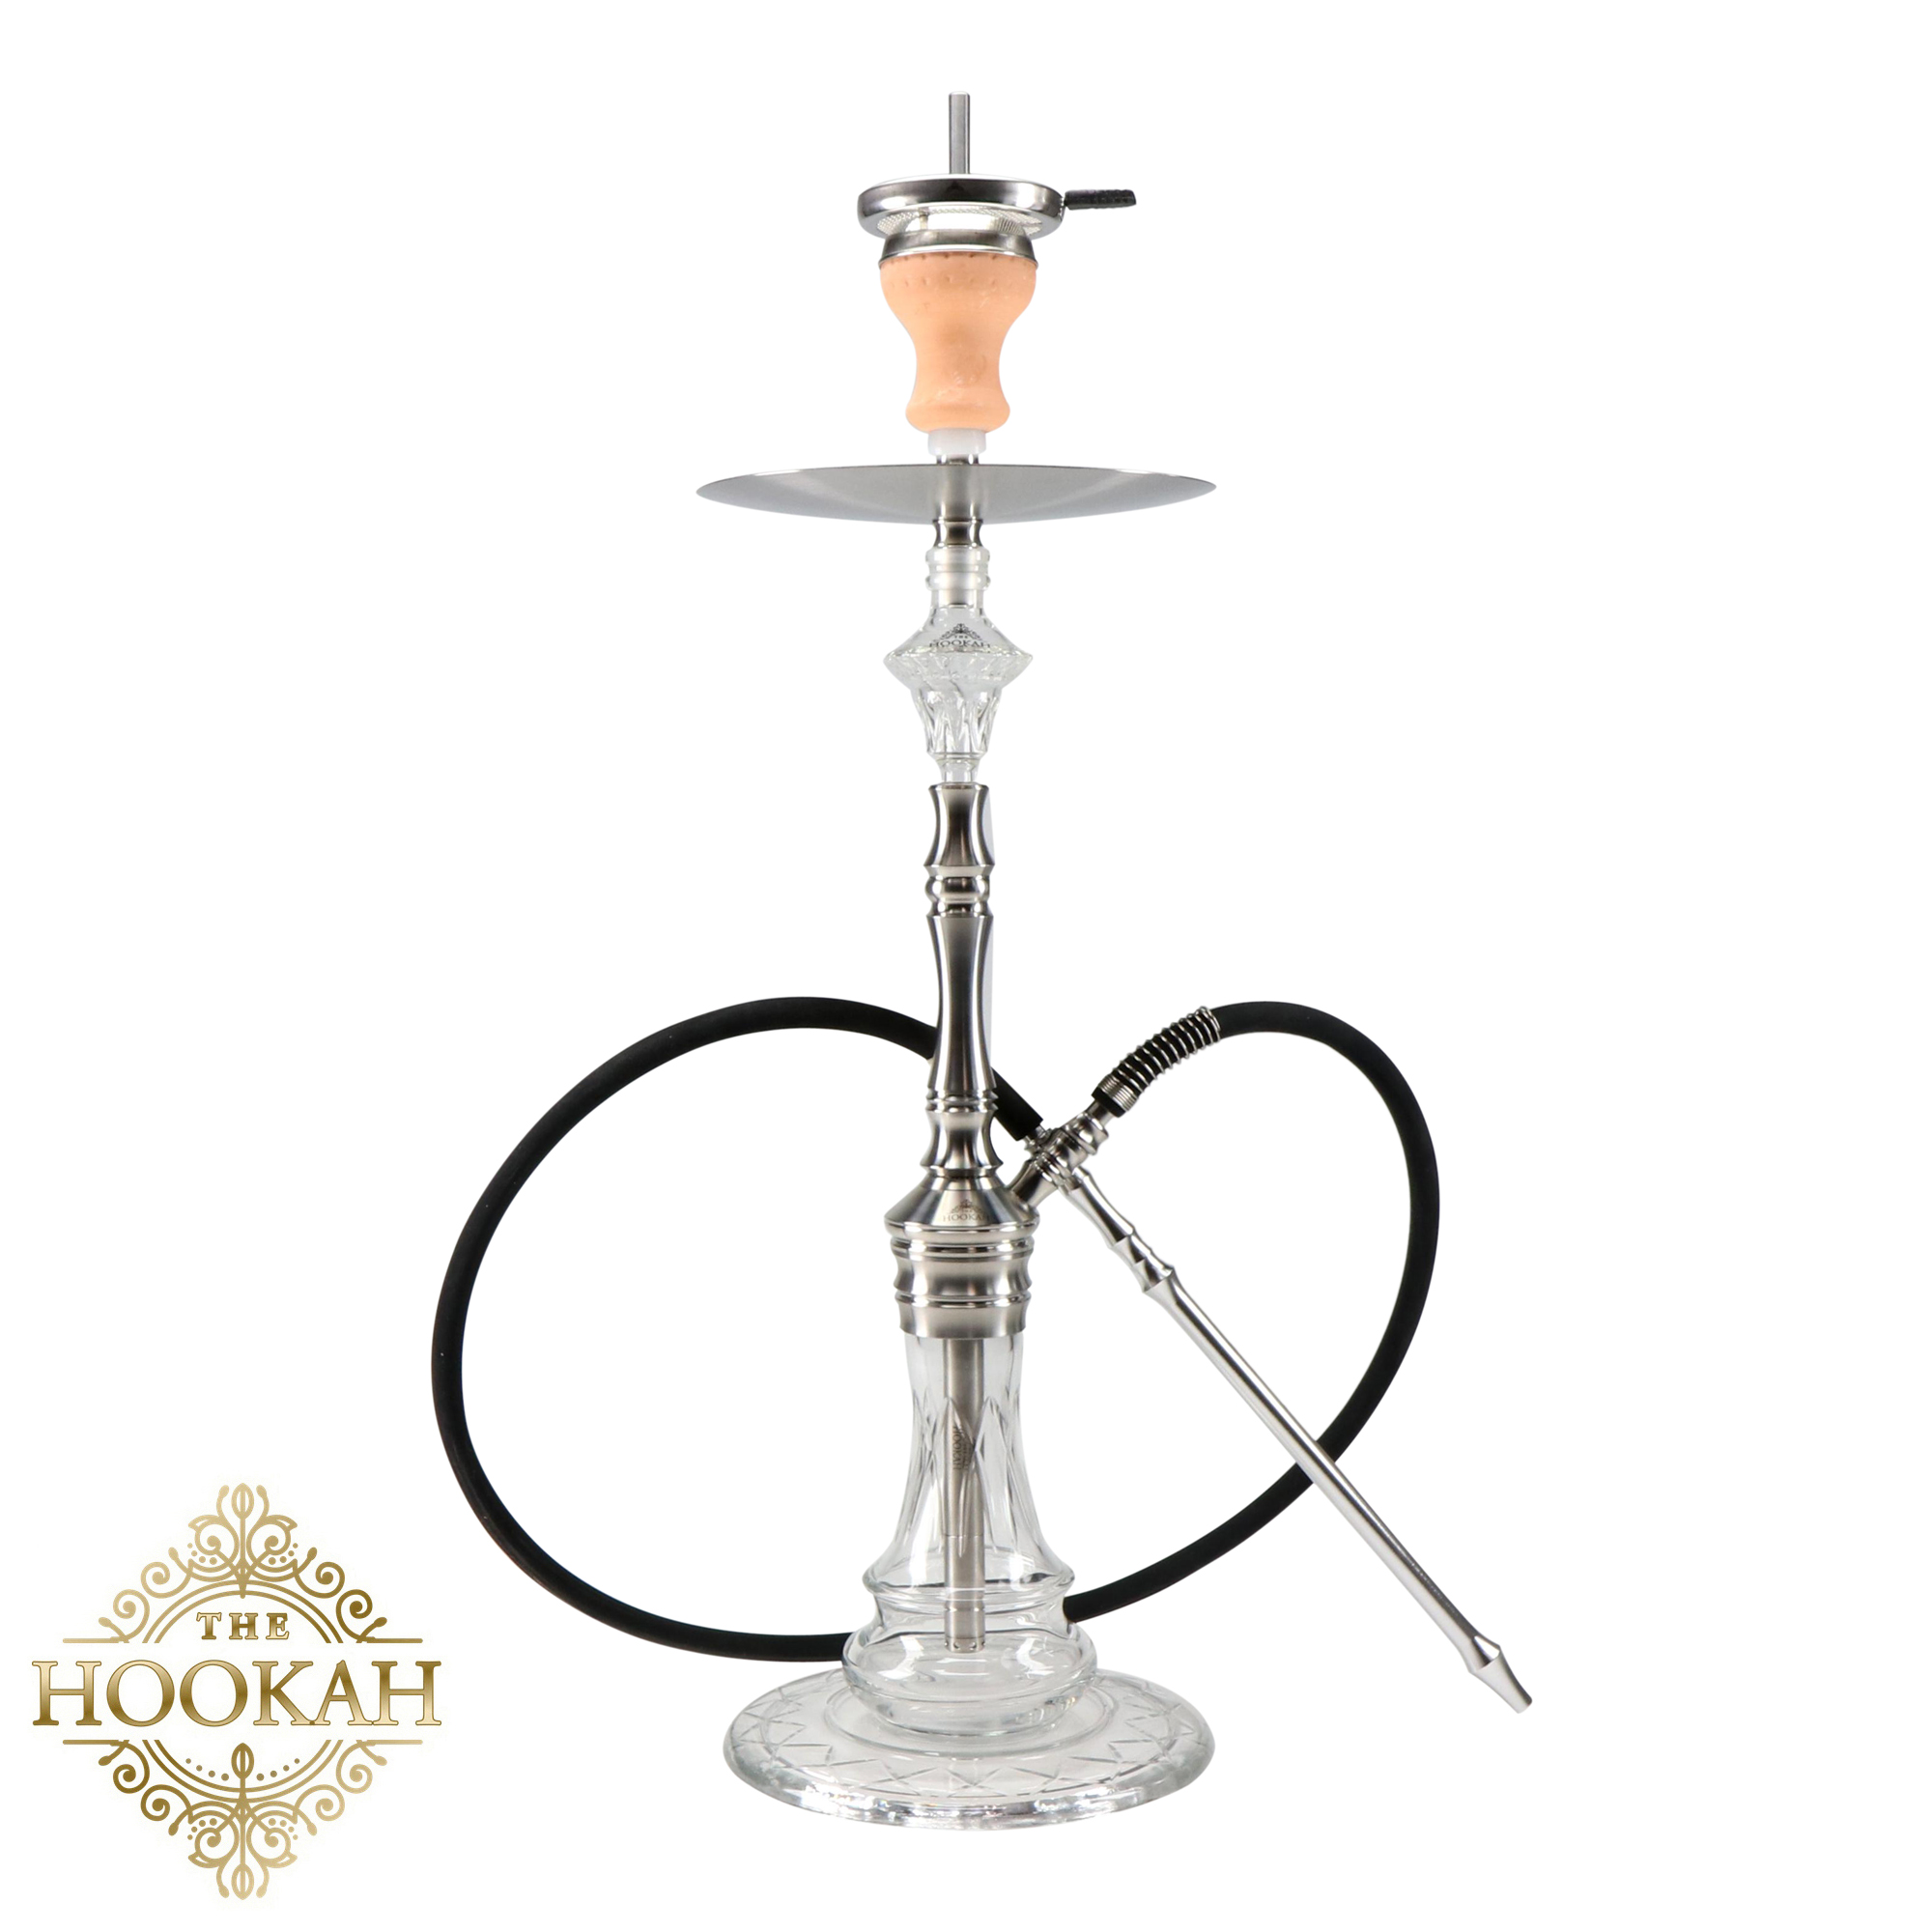 EXCALIBUR Handcut Shisha incl. 6-chamber blow-out system Base